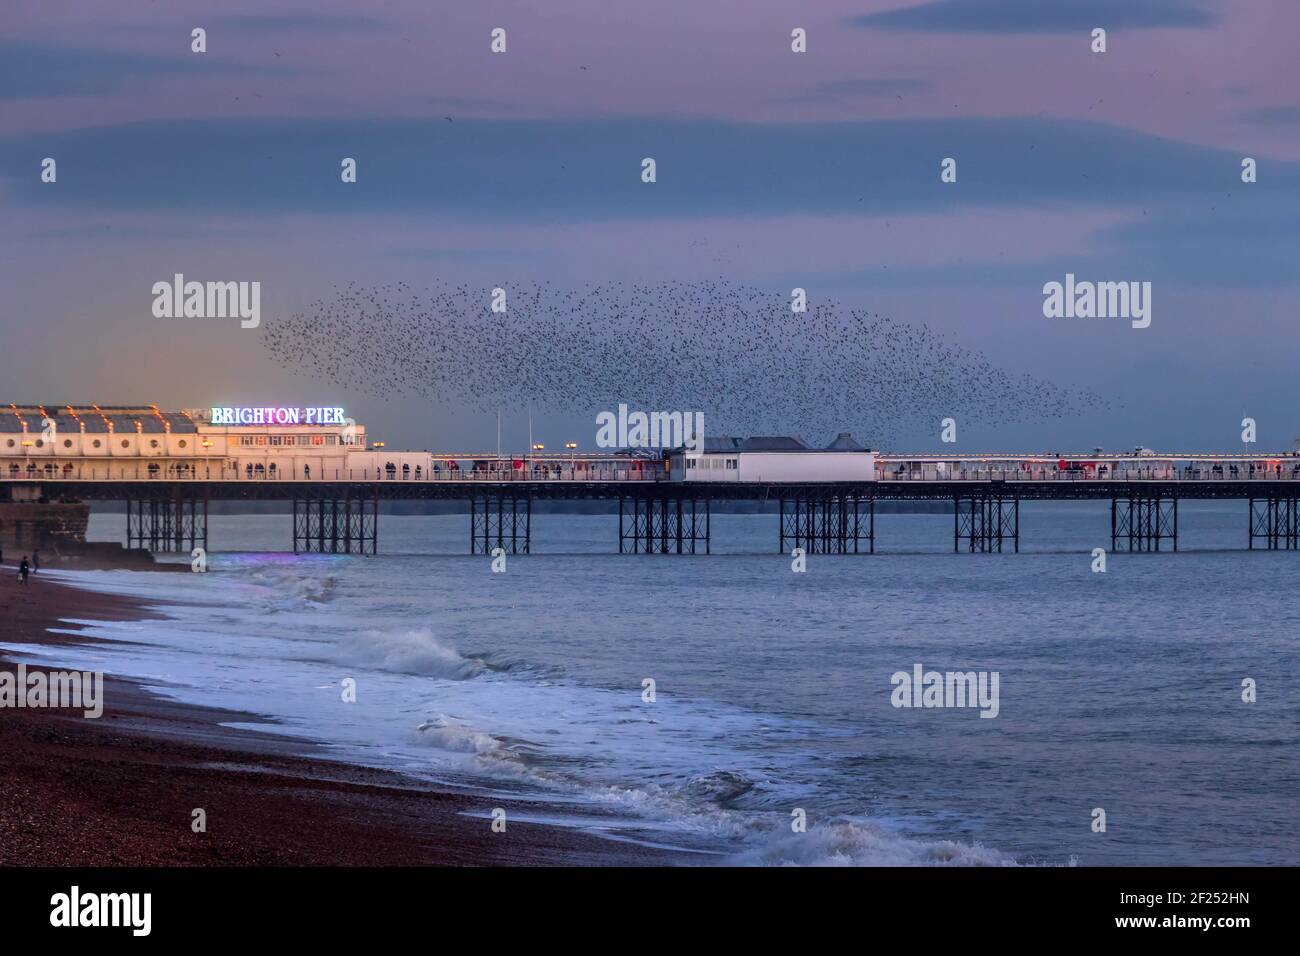 BRIGHTON, EAST SUSSEX/UK - JANUARY 26 : Starlings over the Pier in Brighton East Sussex on January 26, 2018. Unidentified people Stock Photo